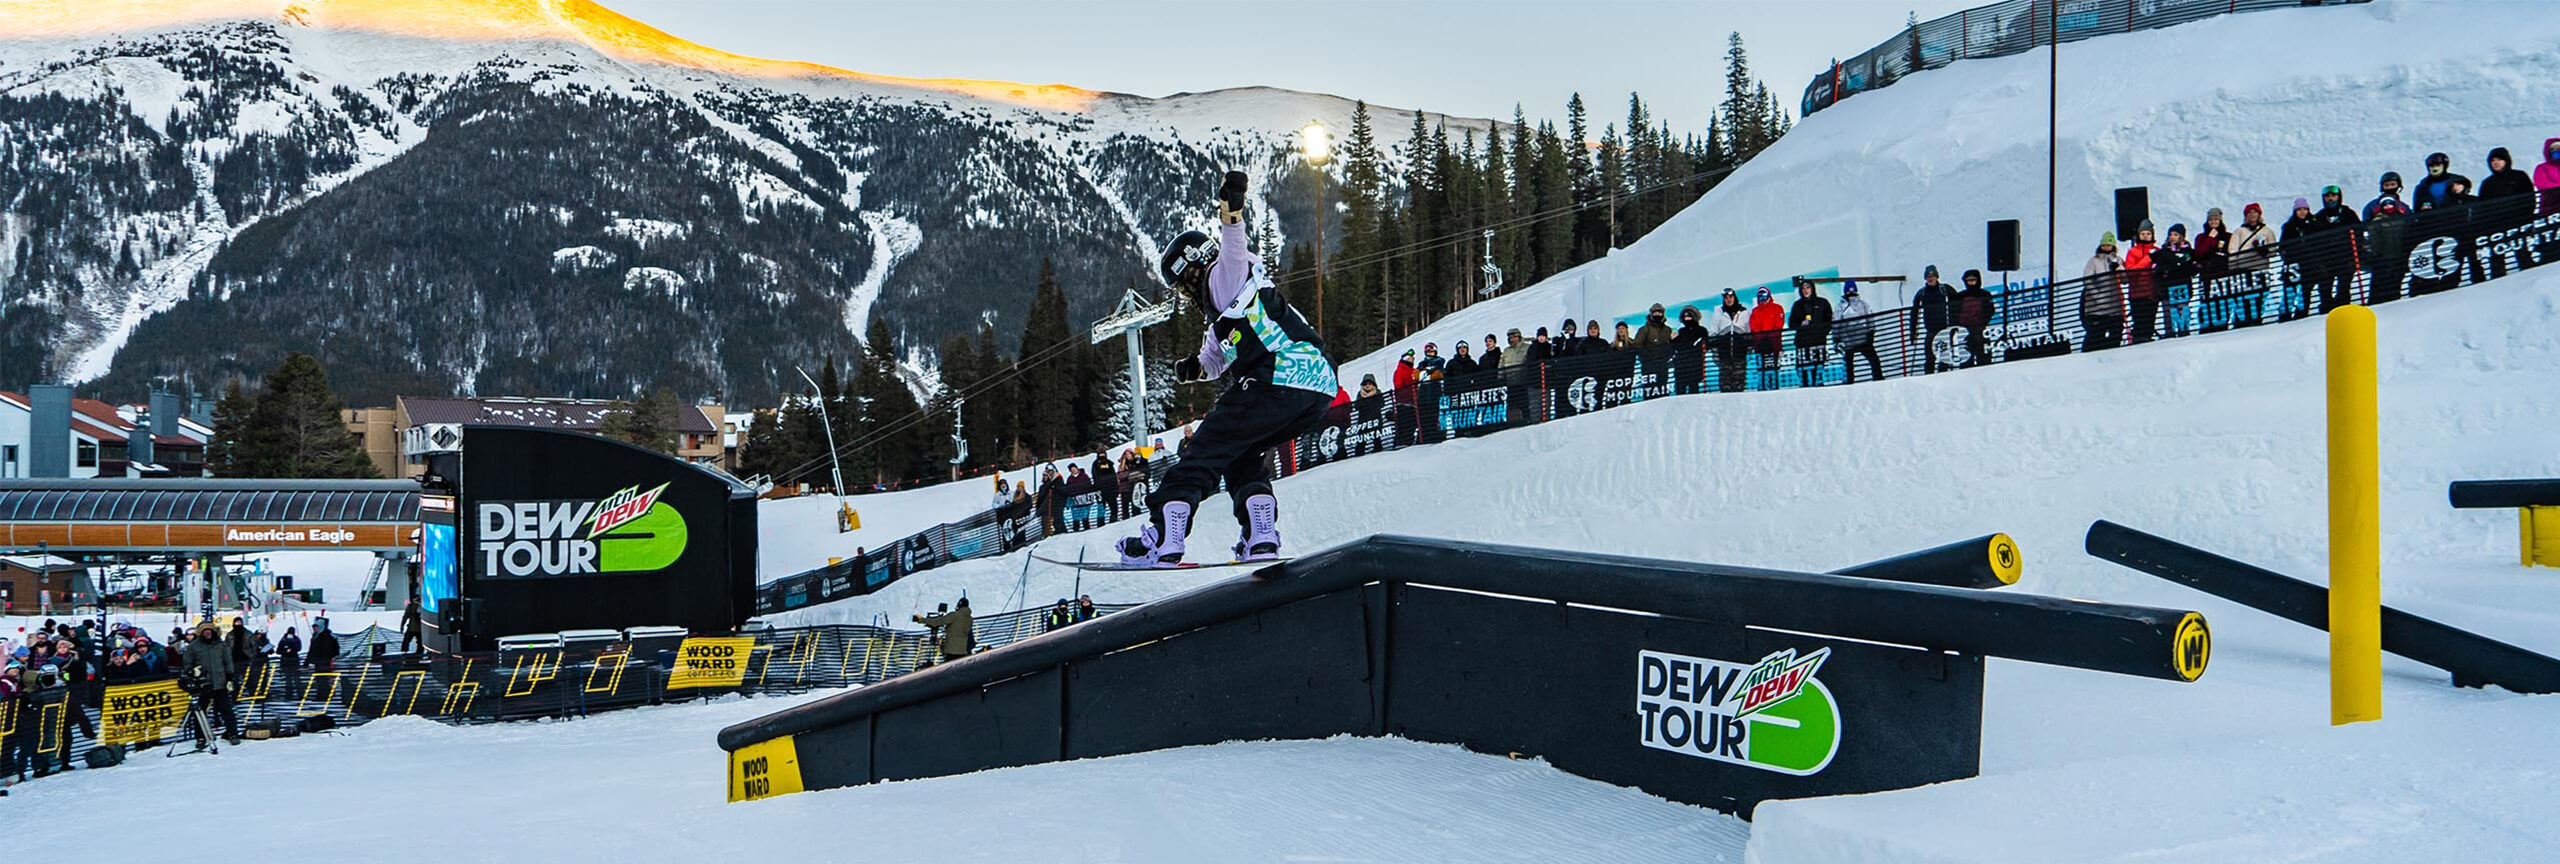 Snowboarder on rail at Dew Tour at Copper